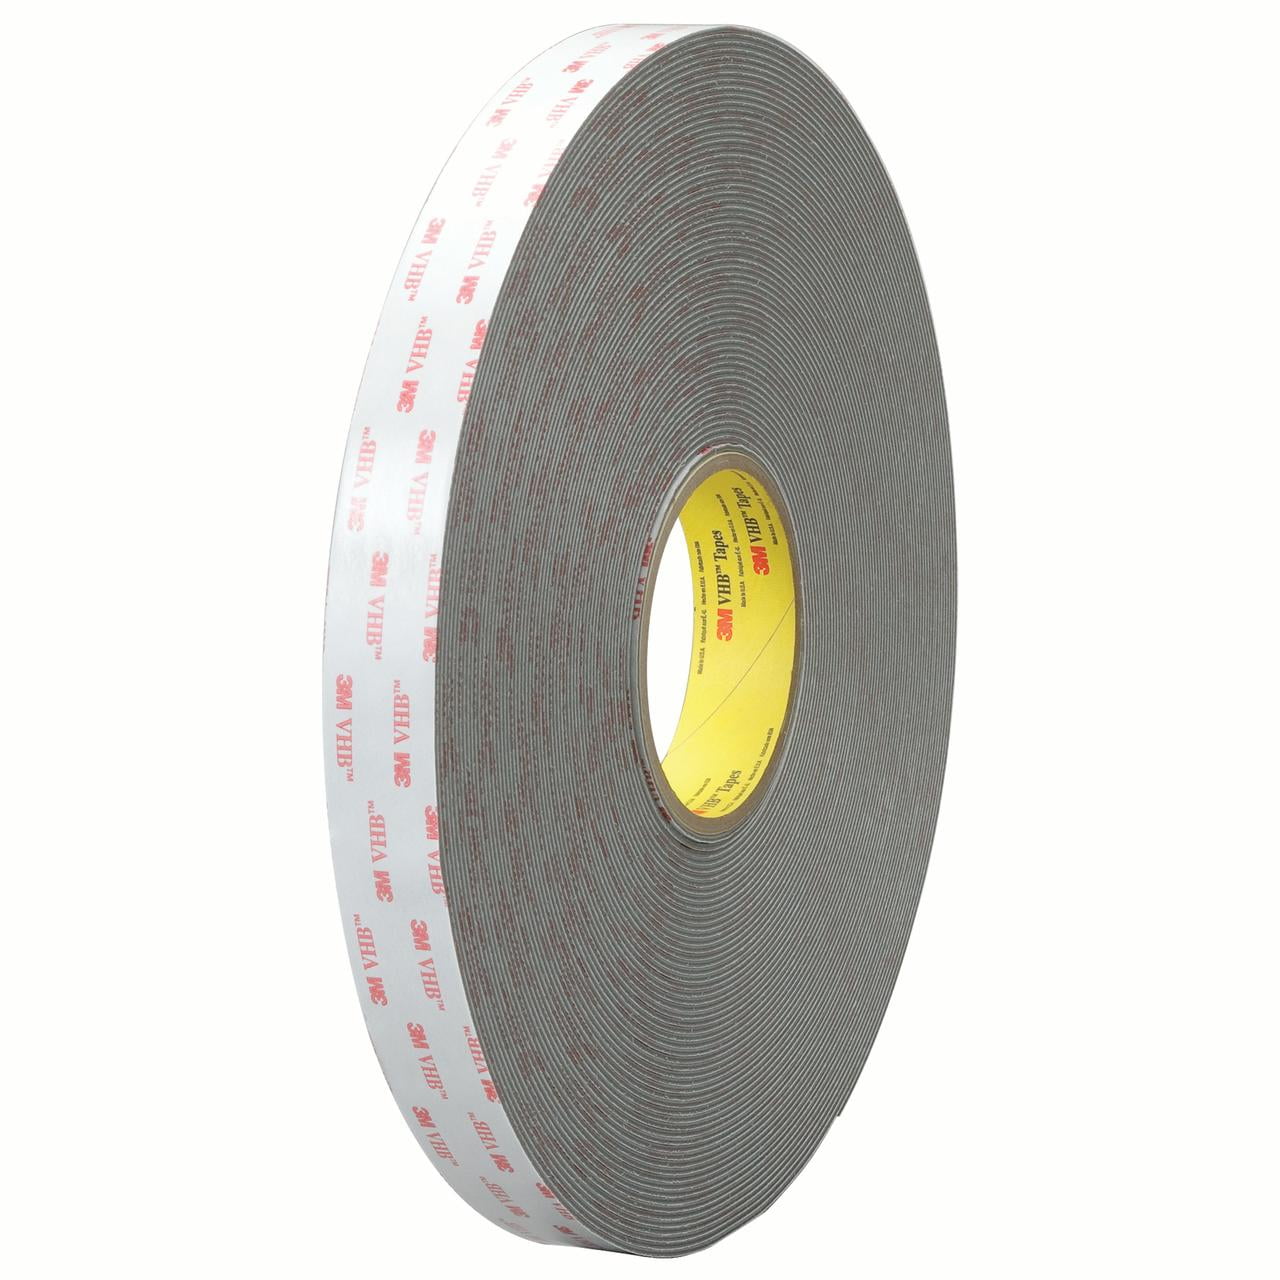 495601r 1 In. X 5 Yards Gray 3m 4956 Tape